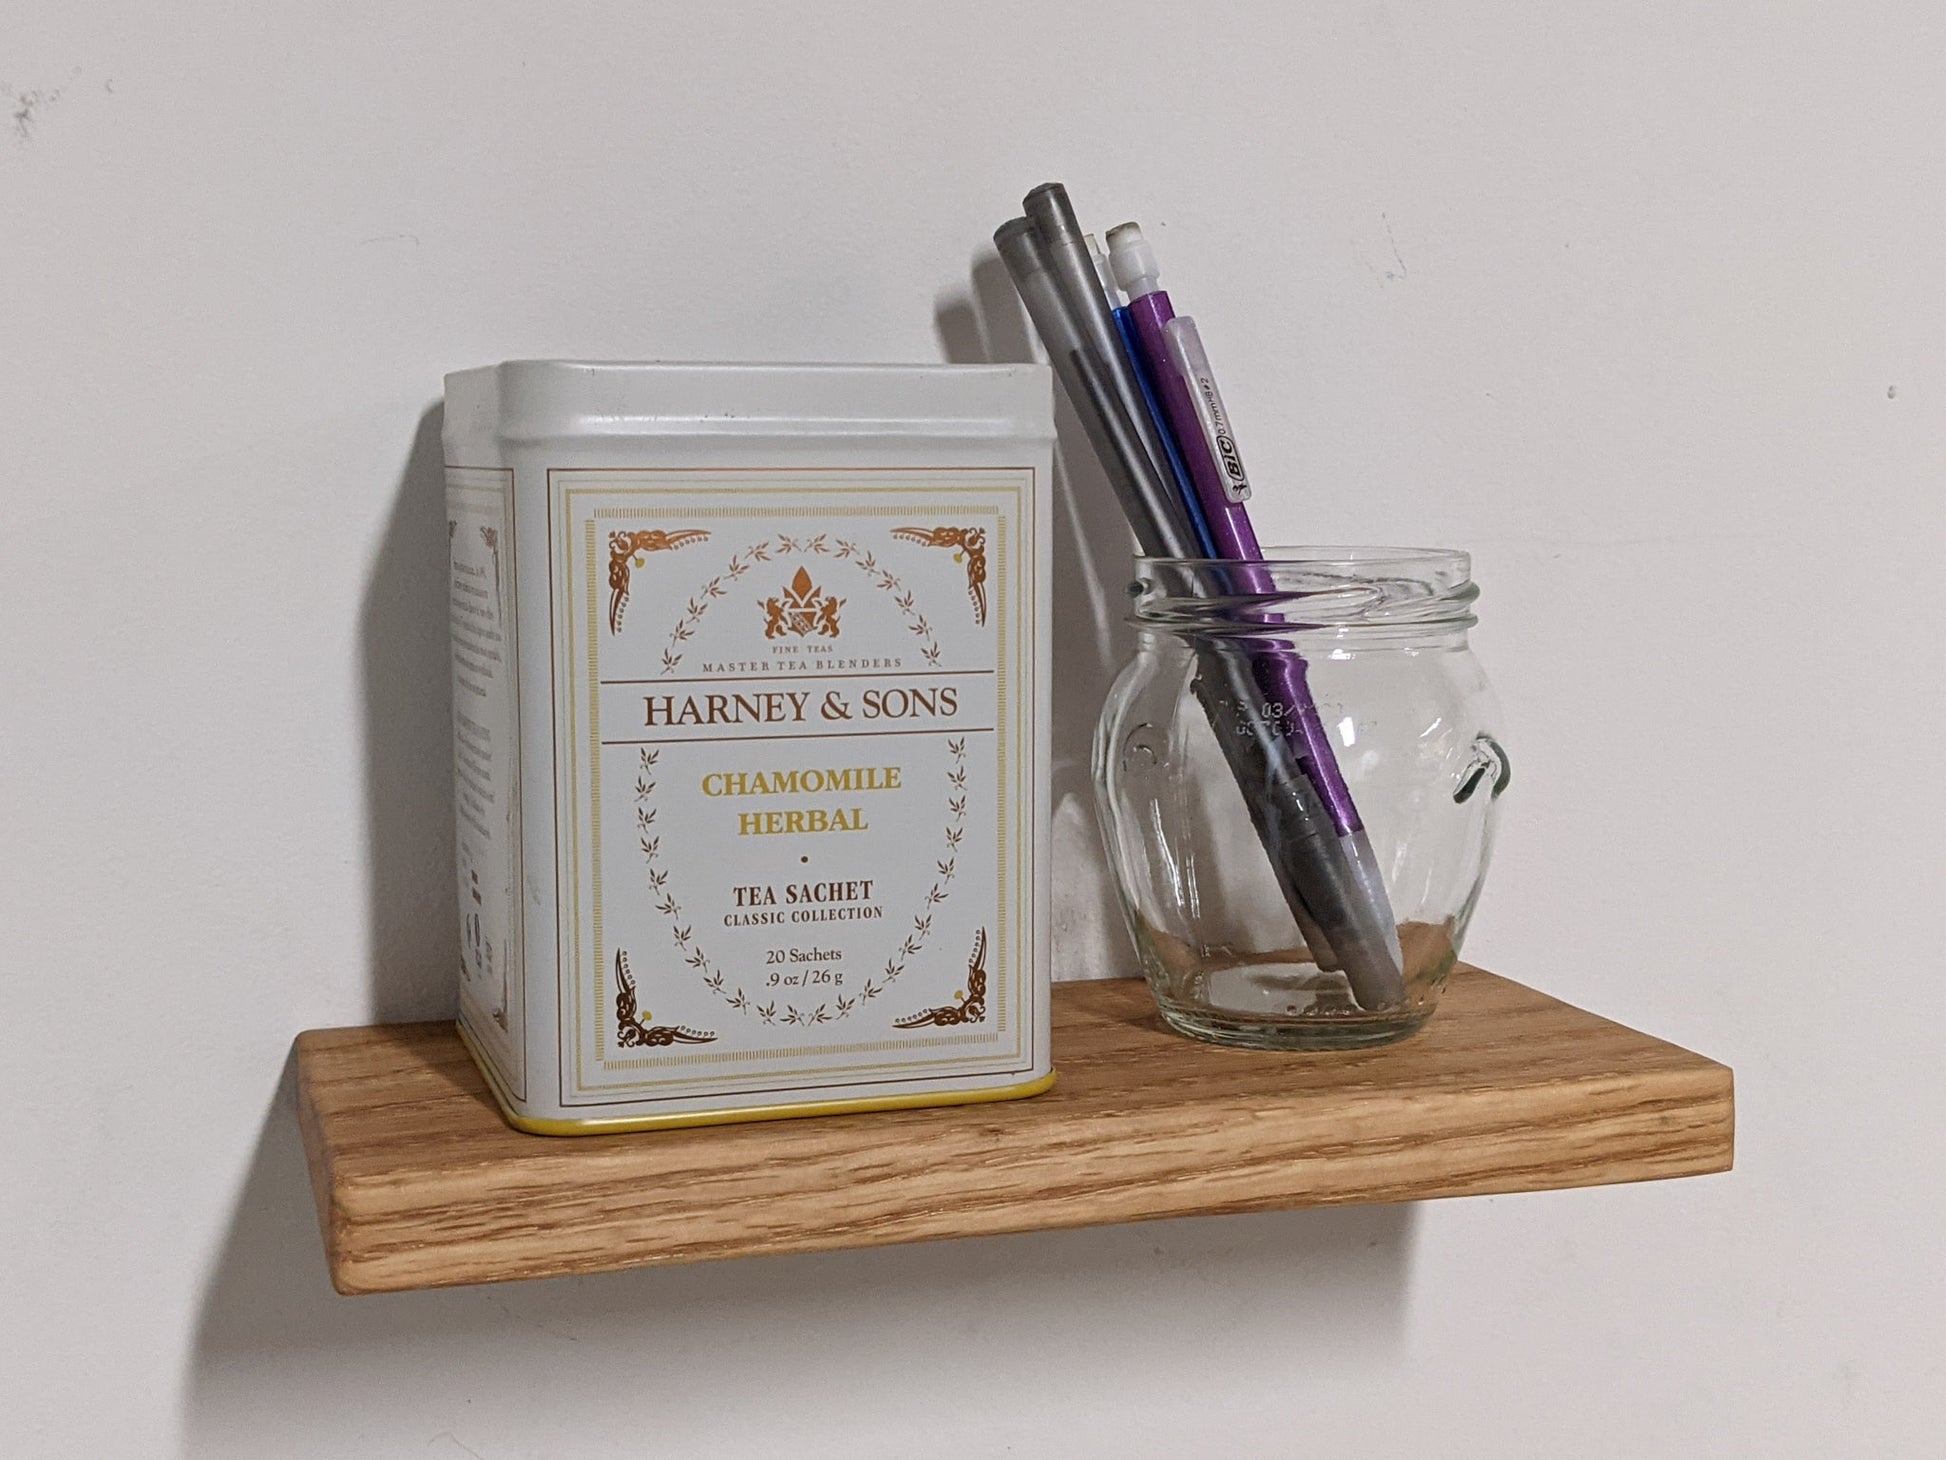 A minimalist oak floating shelf is easily mounted onto a wall and displays a white Harney and Sons, Chamomile Herbal tea bin and a clear round pencil holder. There are two pens and two pencils in the pencil holder.